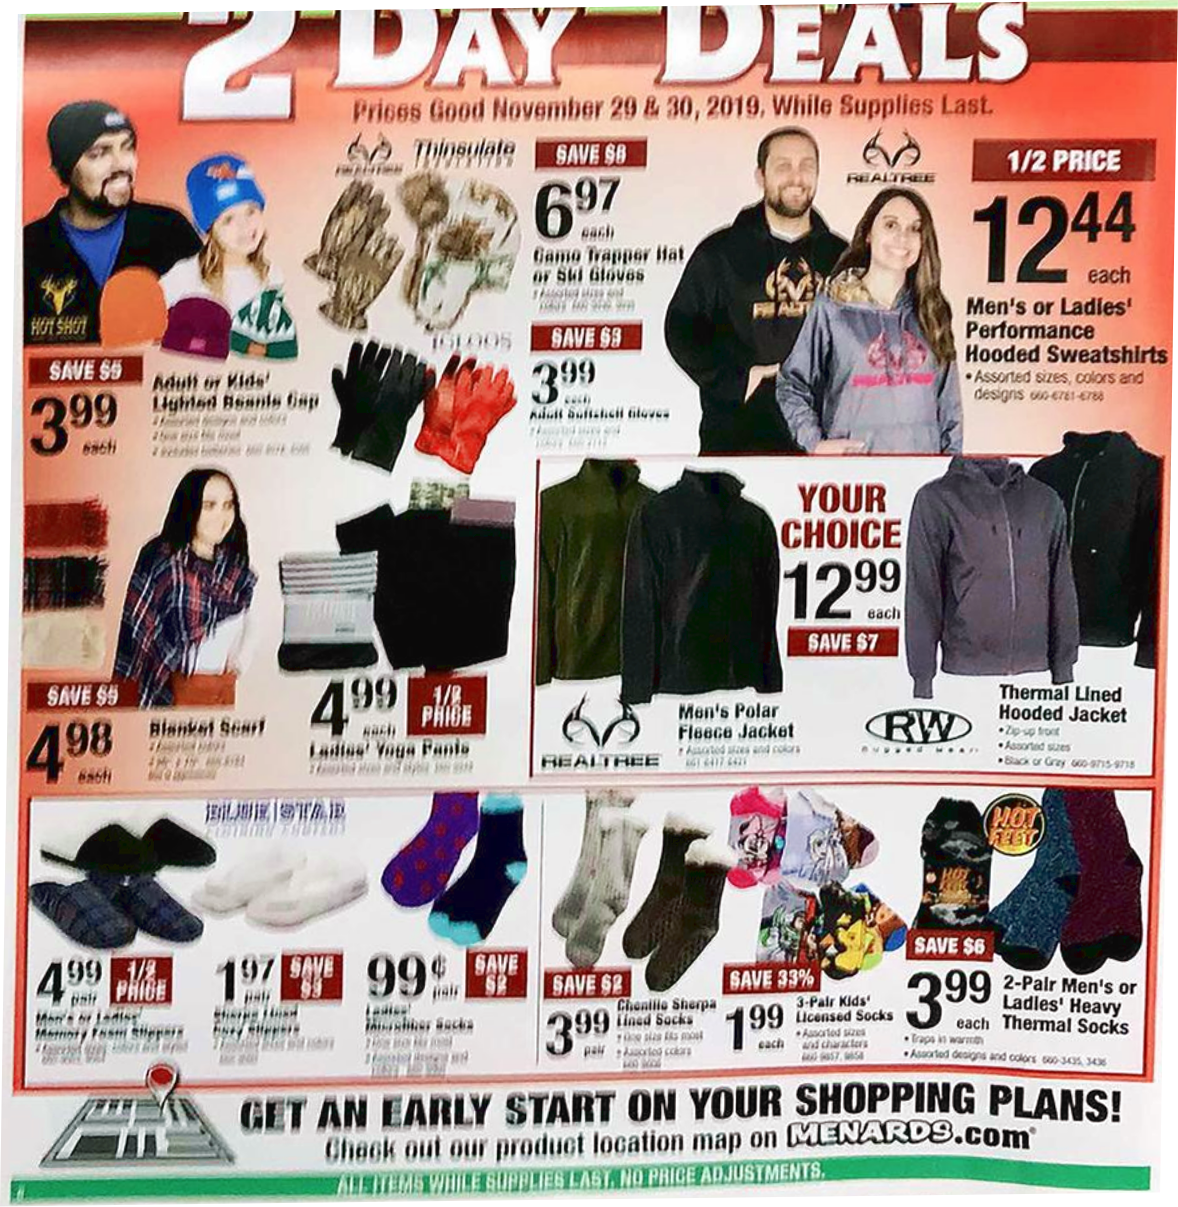 Menards Black Friday 2020 Sale - What to Expect - Blacker Friday